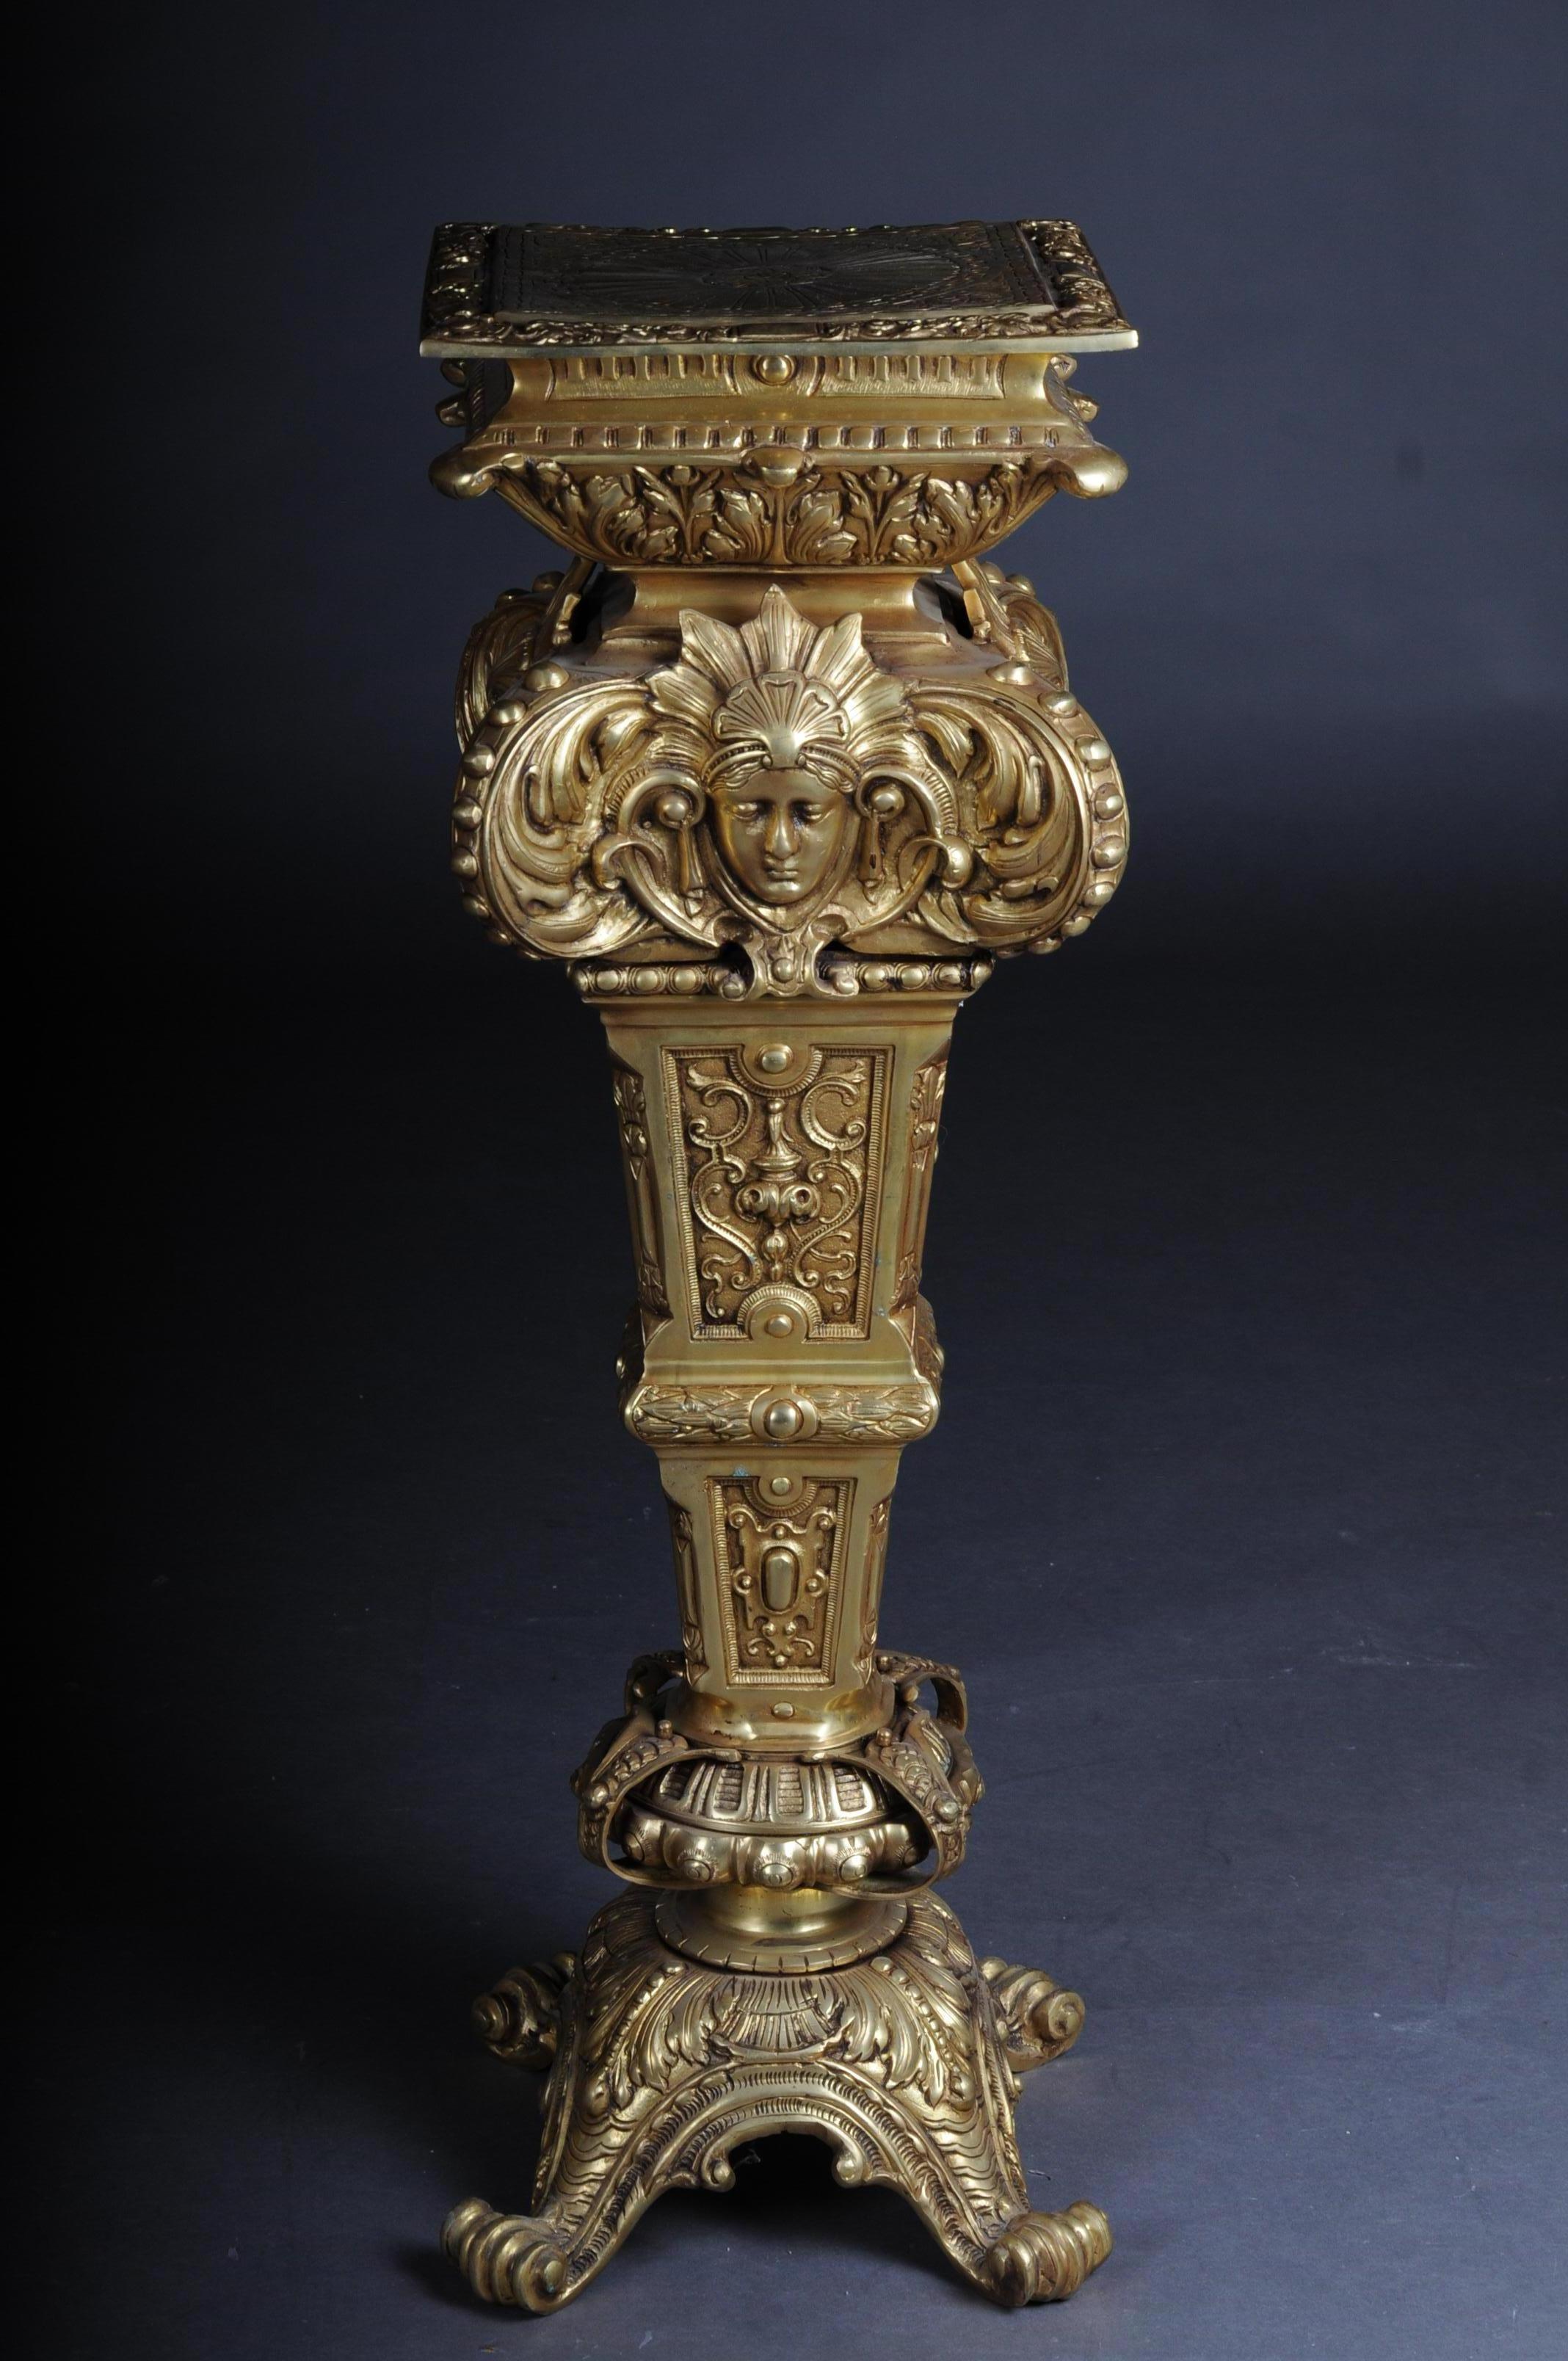 Massive finely engraved bronze casting. With richly structured, strongly ornamented. Ending the pillar on four volute-shaped legs. Under the doubly stepped, finely chiseled cover plate are all-round, fully plastic female masks. Very difficult and